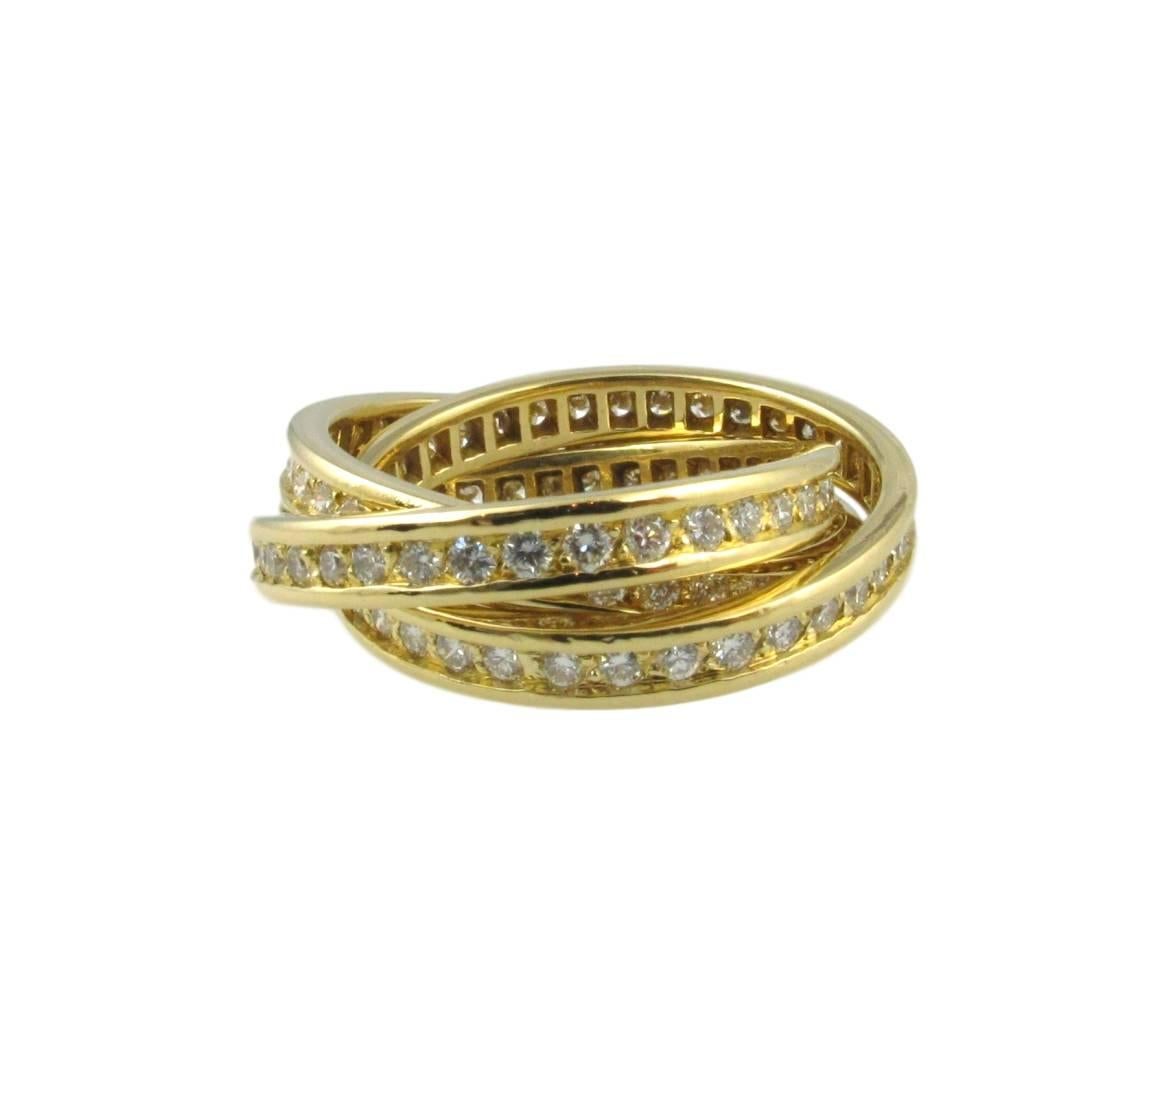 3 yellow intertwined diamond bands set with a total of 96 brilliant-cut diamonds totaling 1.55 carats.
French assay marks.
Signed Cartier
'Conceived by Louis Cartier in 1924, the Trinity ring is one of the Maison’s signature pieces of jewellery. The